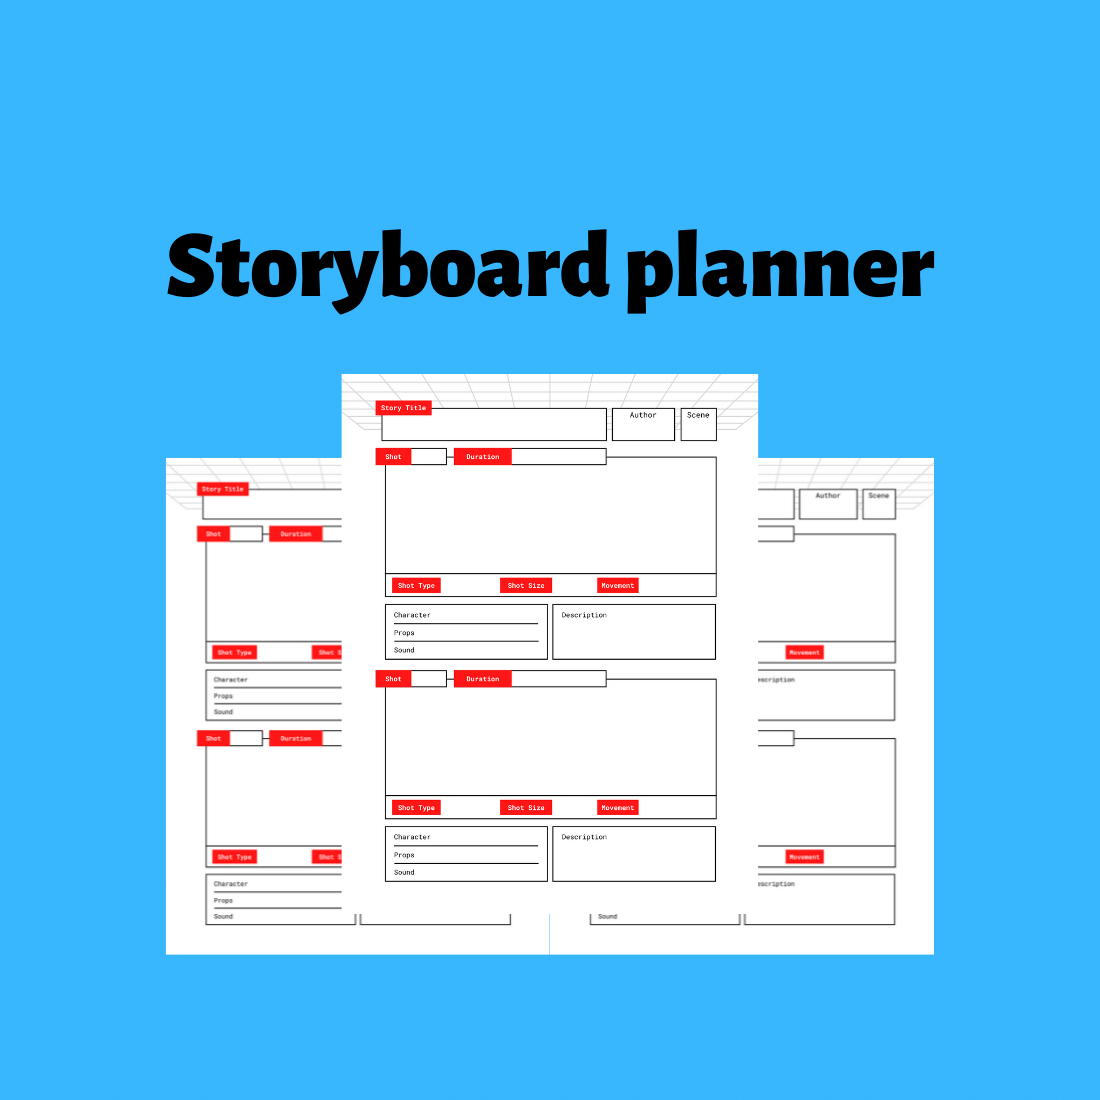 Simple Storyboard Planner Template Design cover image.